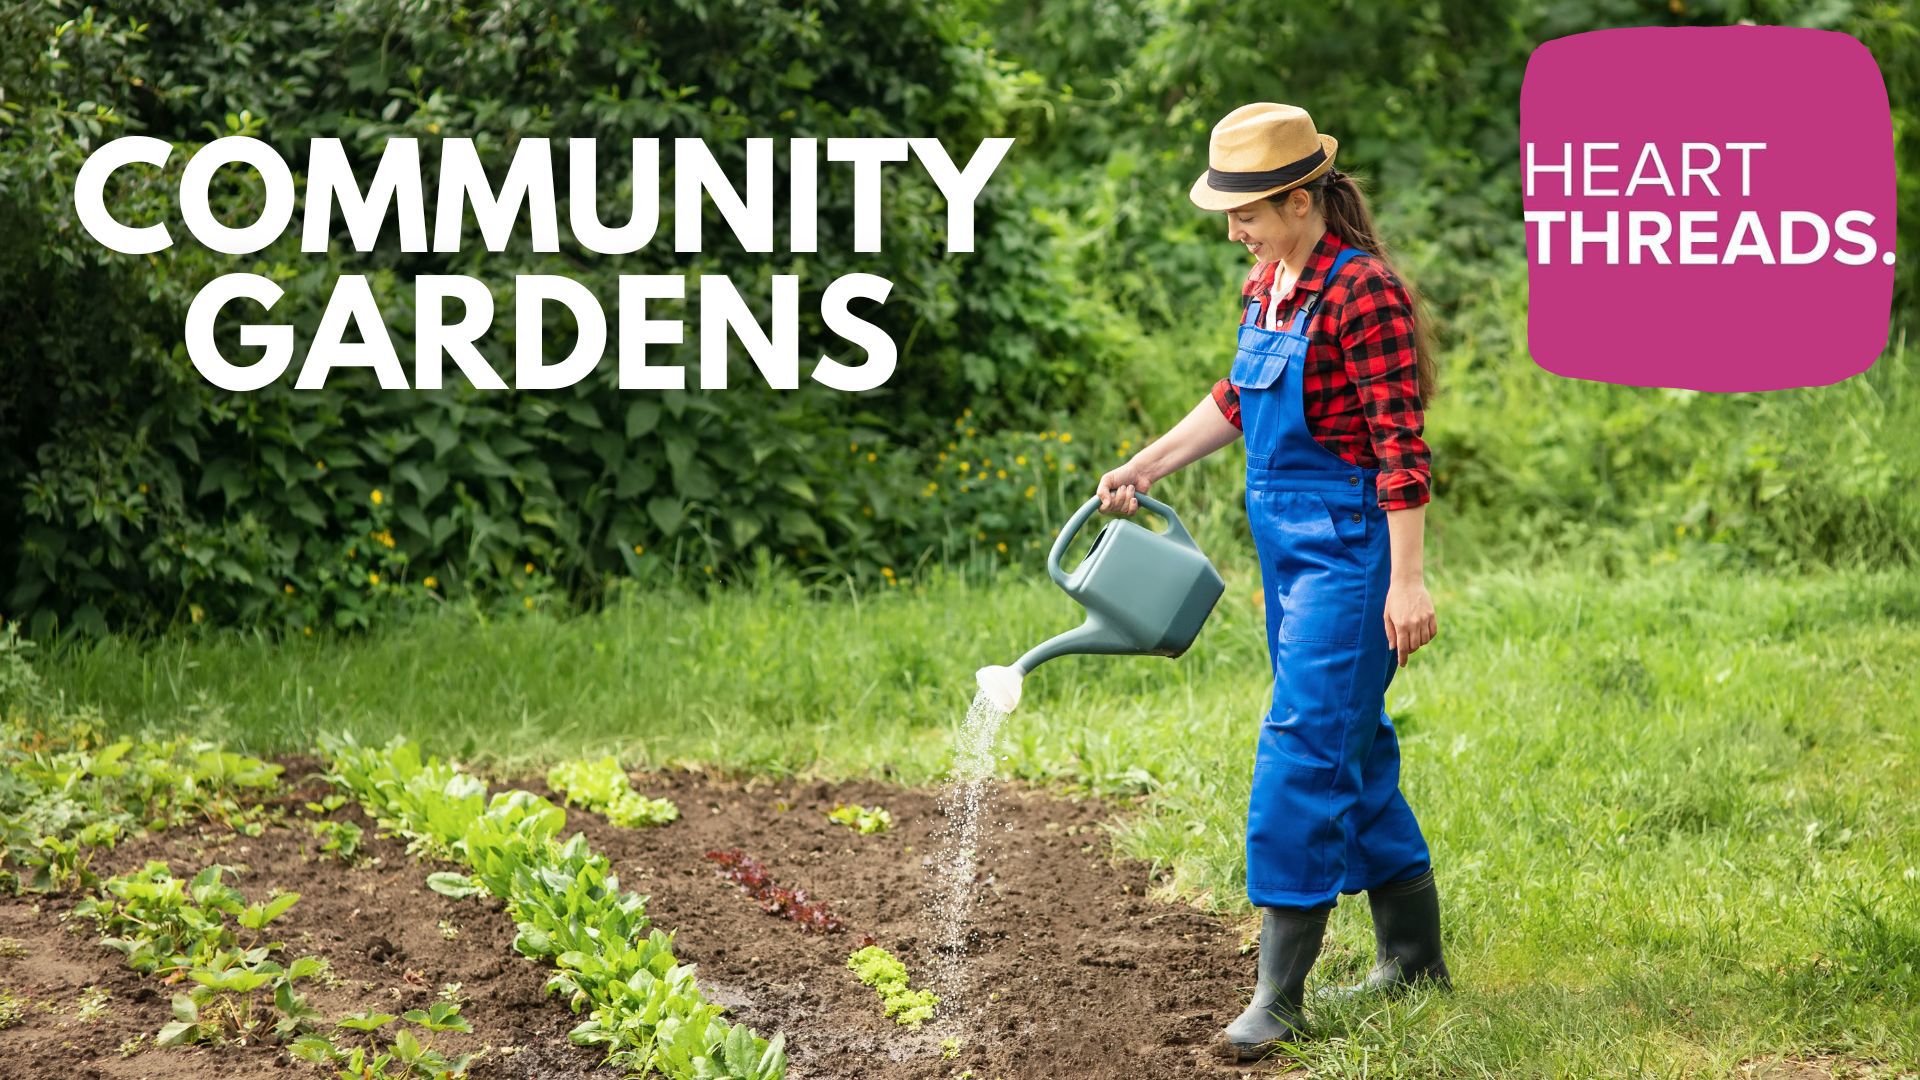 Heartwarming stories of communities coming together to help others through growing fruits and vegetables. A look at community gardens bringing people together.